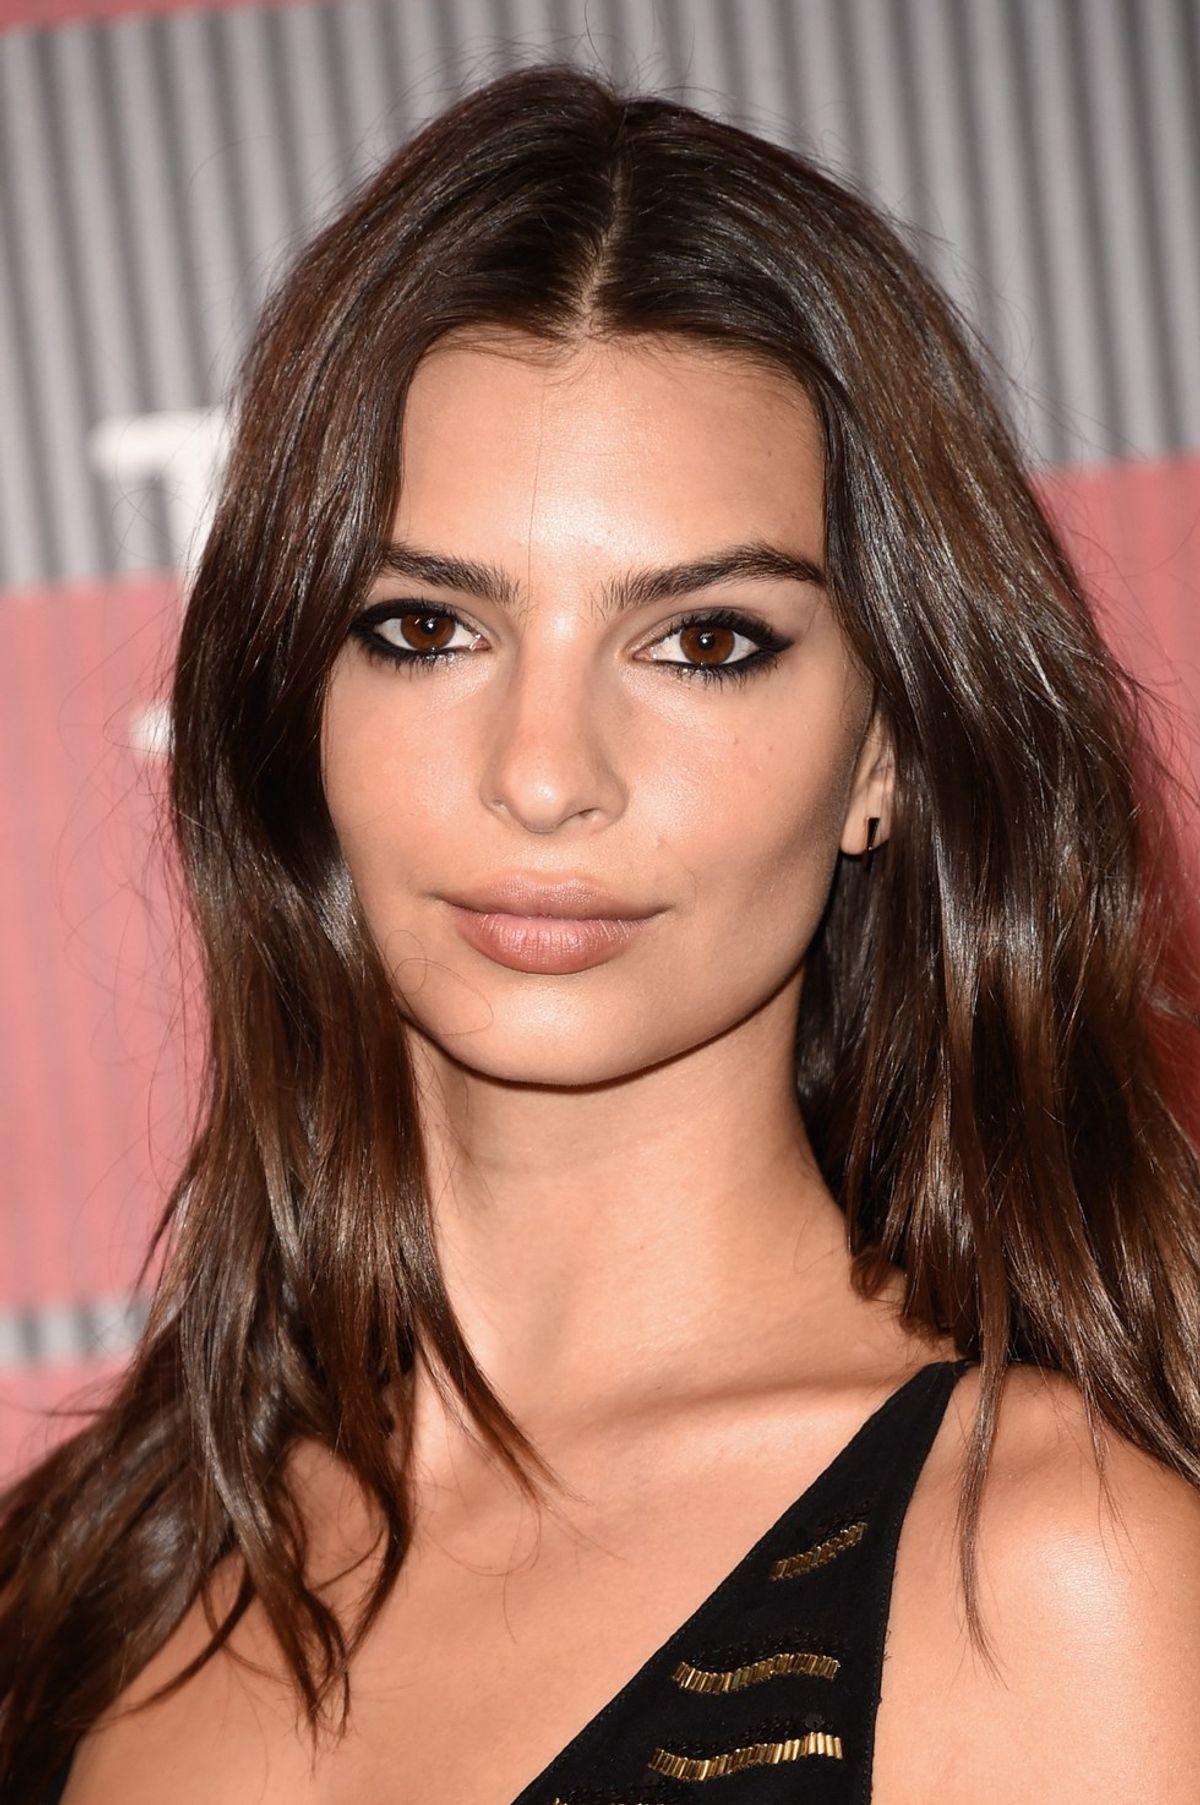 Many Of You May Not Know Who Emily Ratajkowski Is